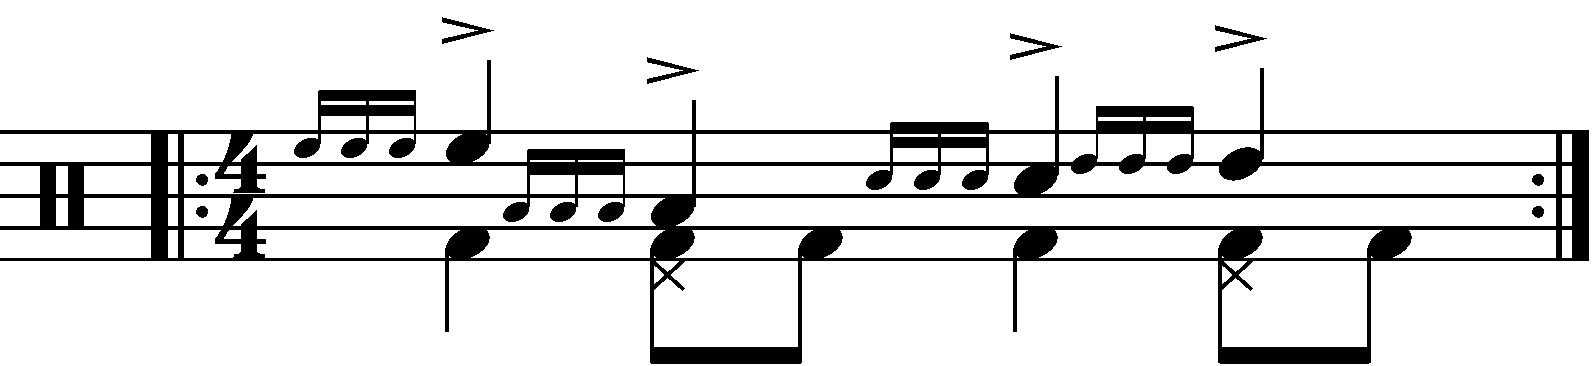 A Four Stroke Ruff moving in quarter notes